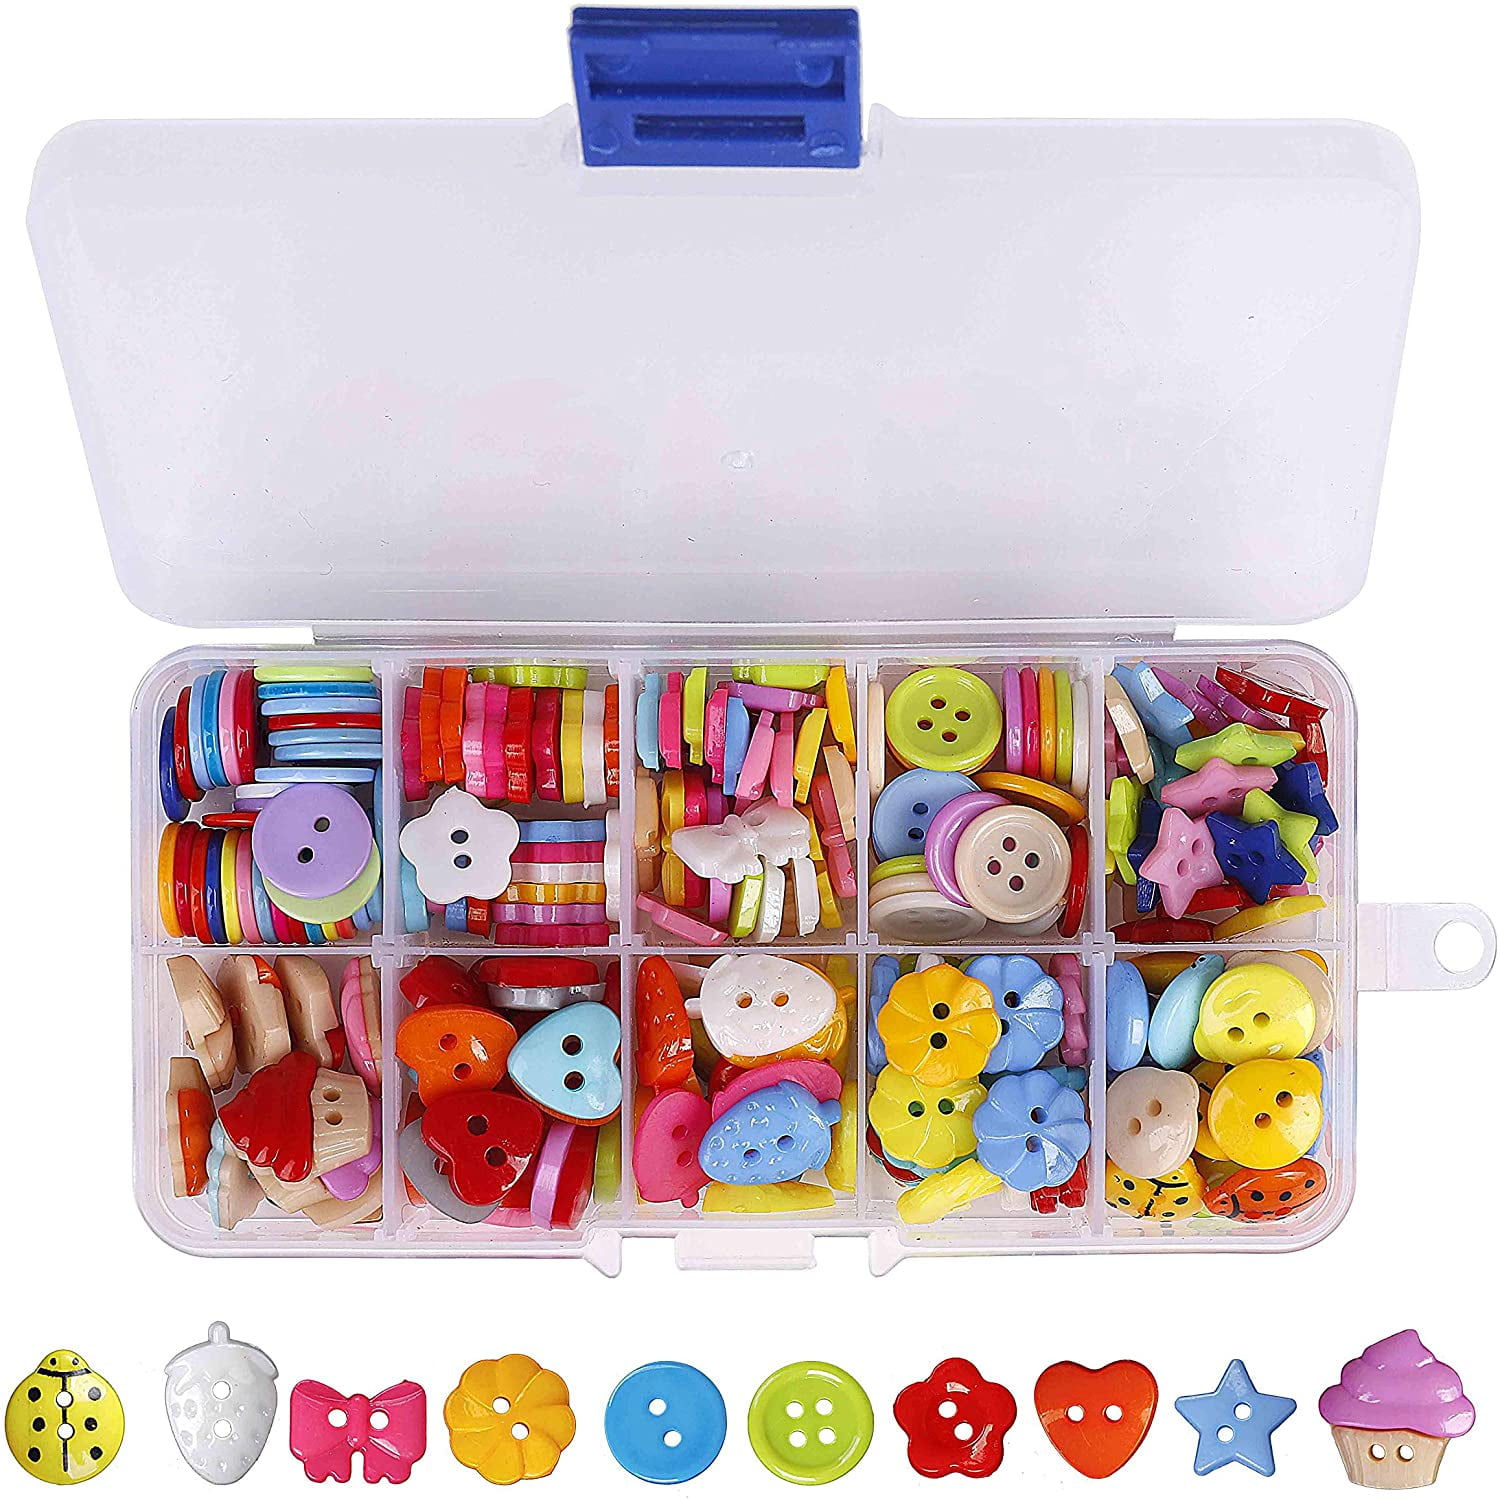 240 Pcs Sewing Button Craft Buttons Resin Button with Plastic Storage Box for DIY Sewing Crafting Scrapbooking Handmade Ornament 